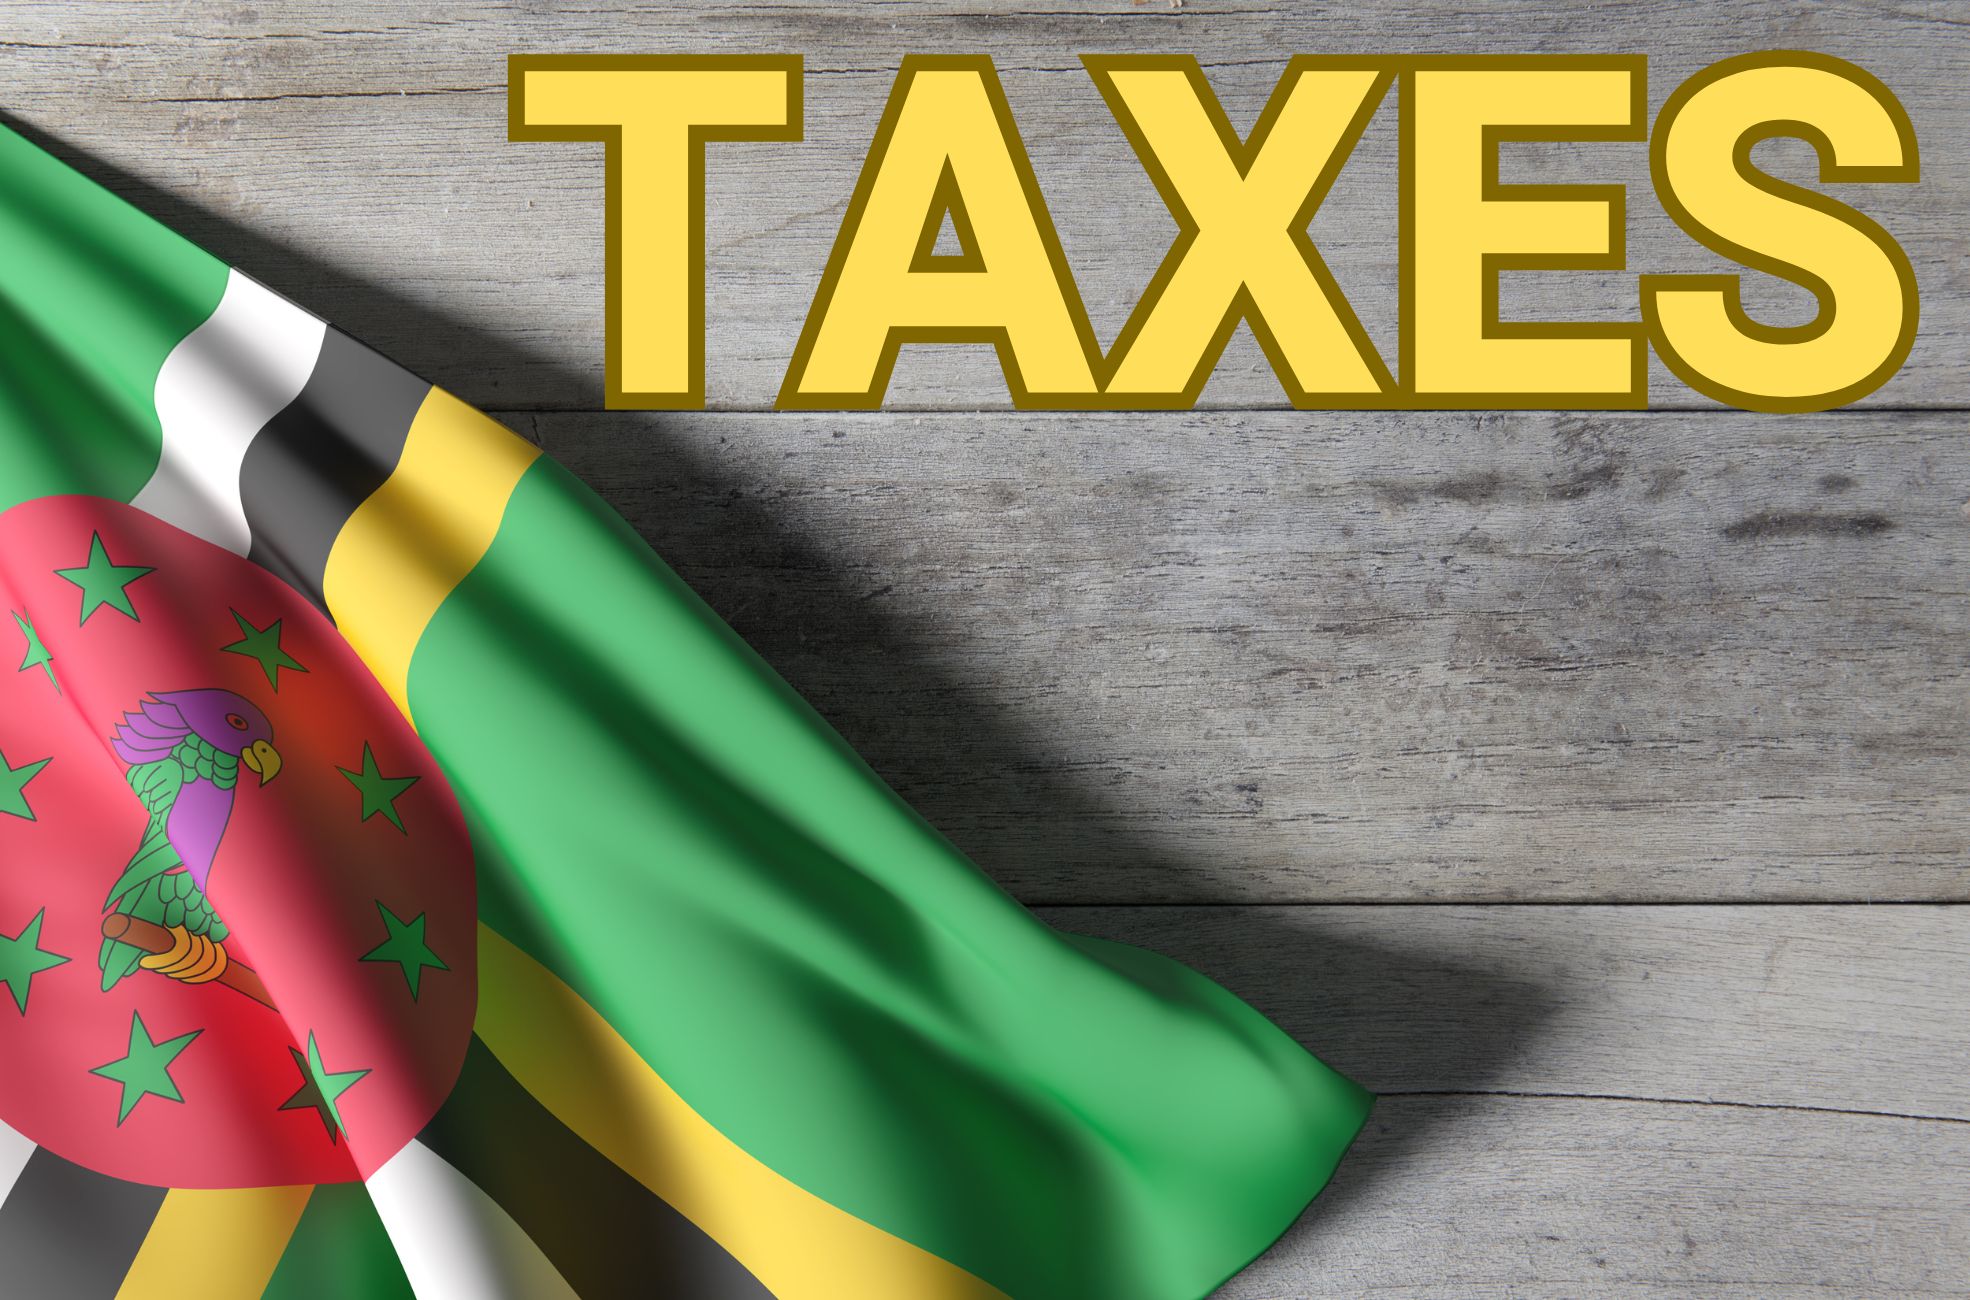 Flag Of Dominica With Word "Taxes"